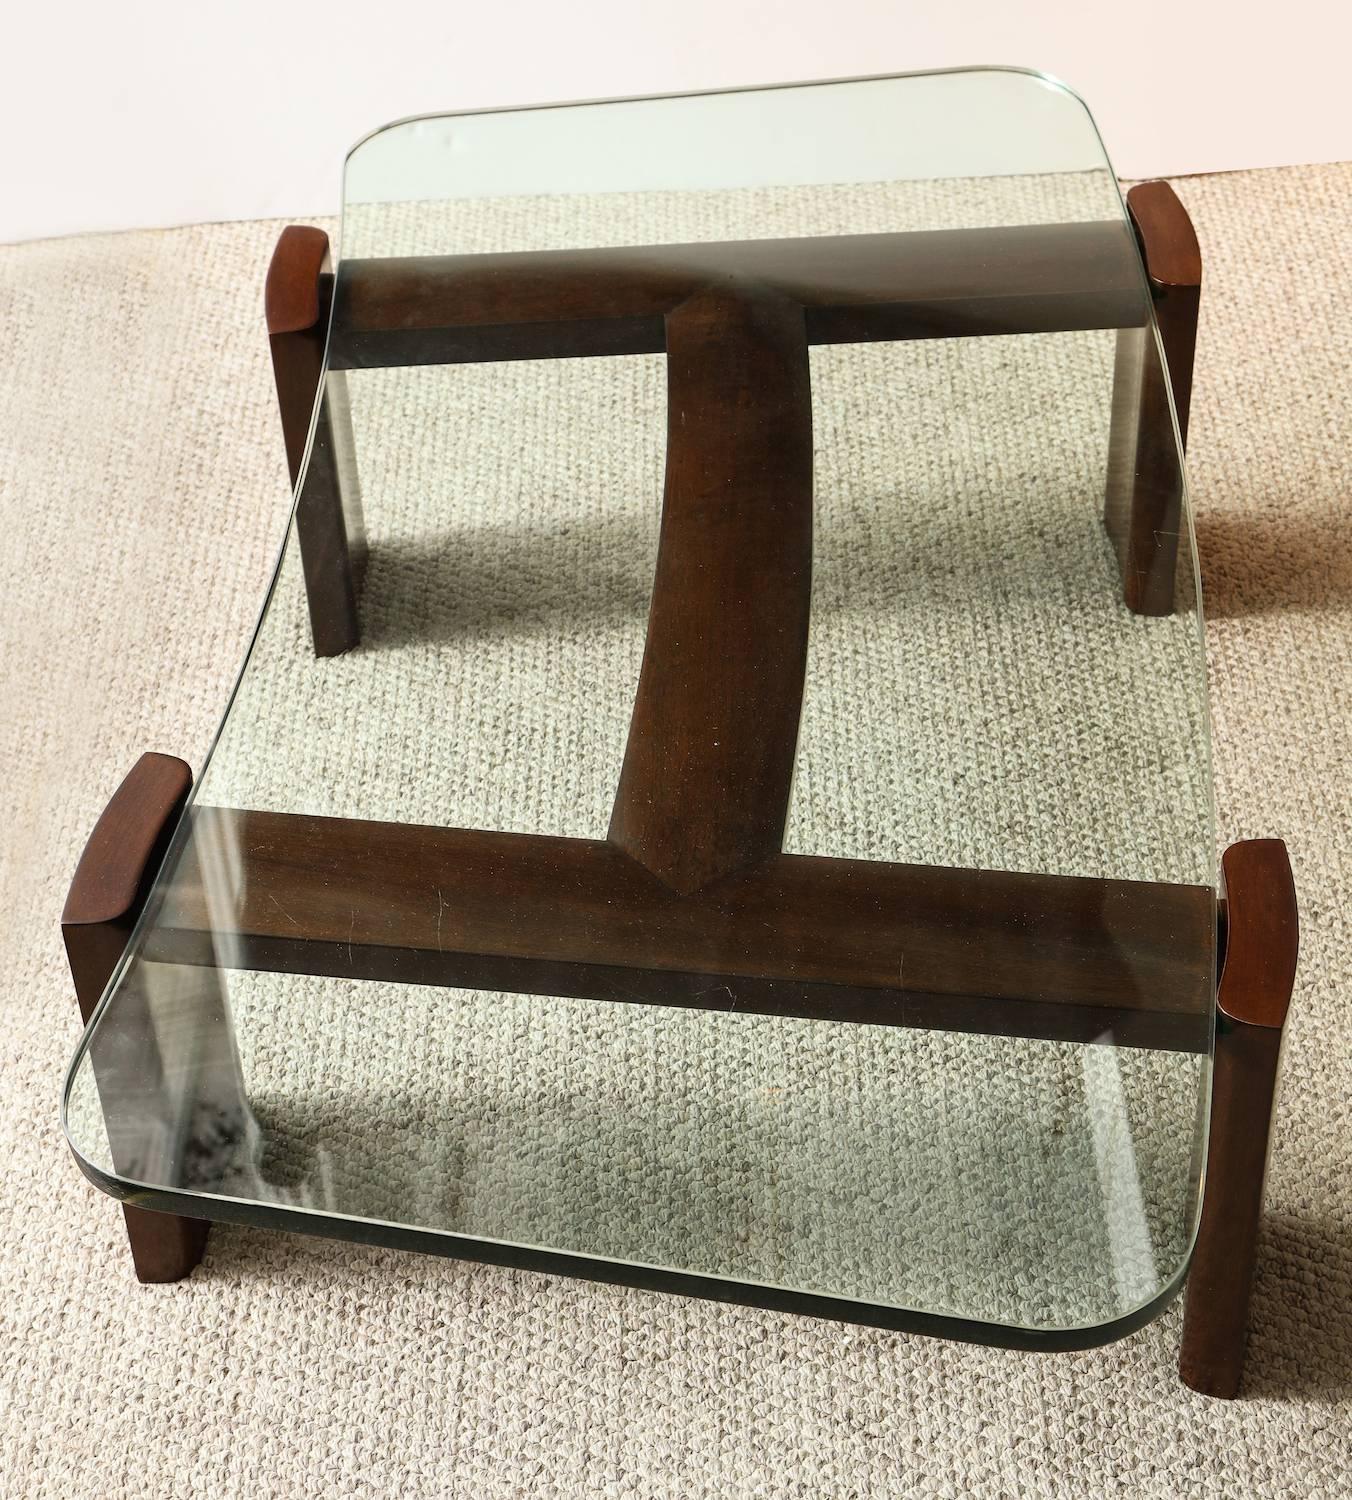 Paul Laszlo custom table of dark stained mahogany. Shaped elements joined to form and abstract "H" shape. Thick, curved glass top insets into the structure. Paul Laszlo metal label affixed to underside of table.